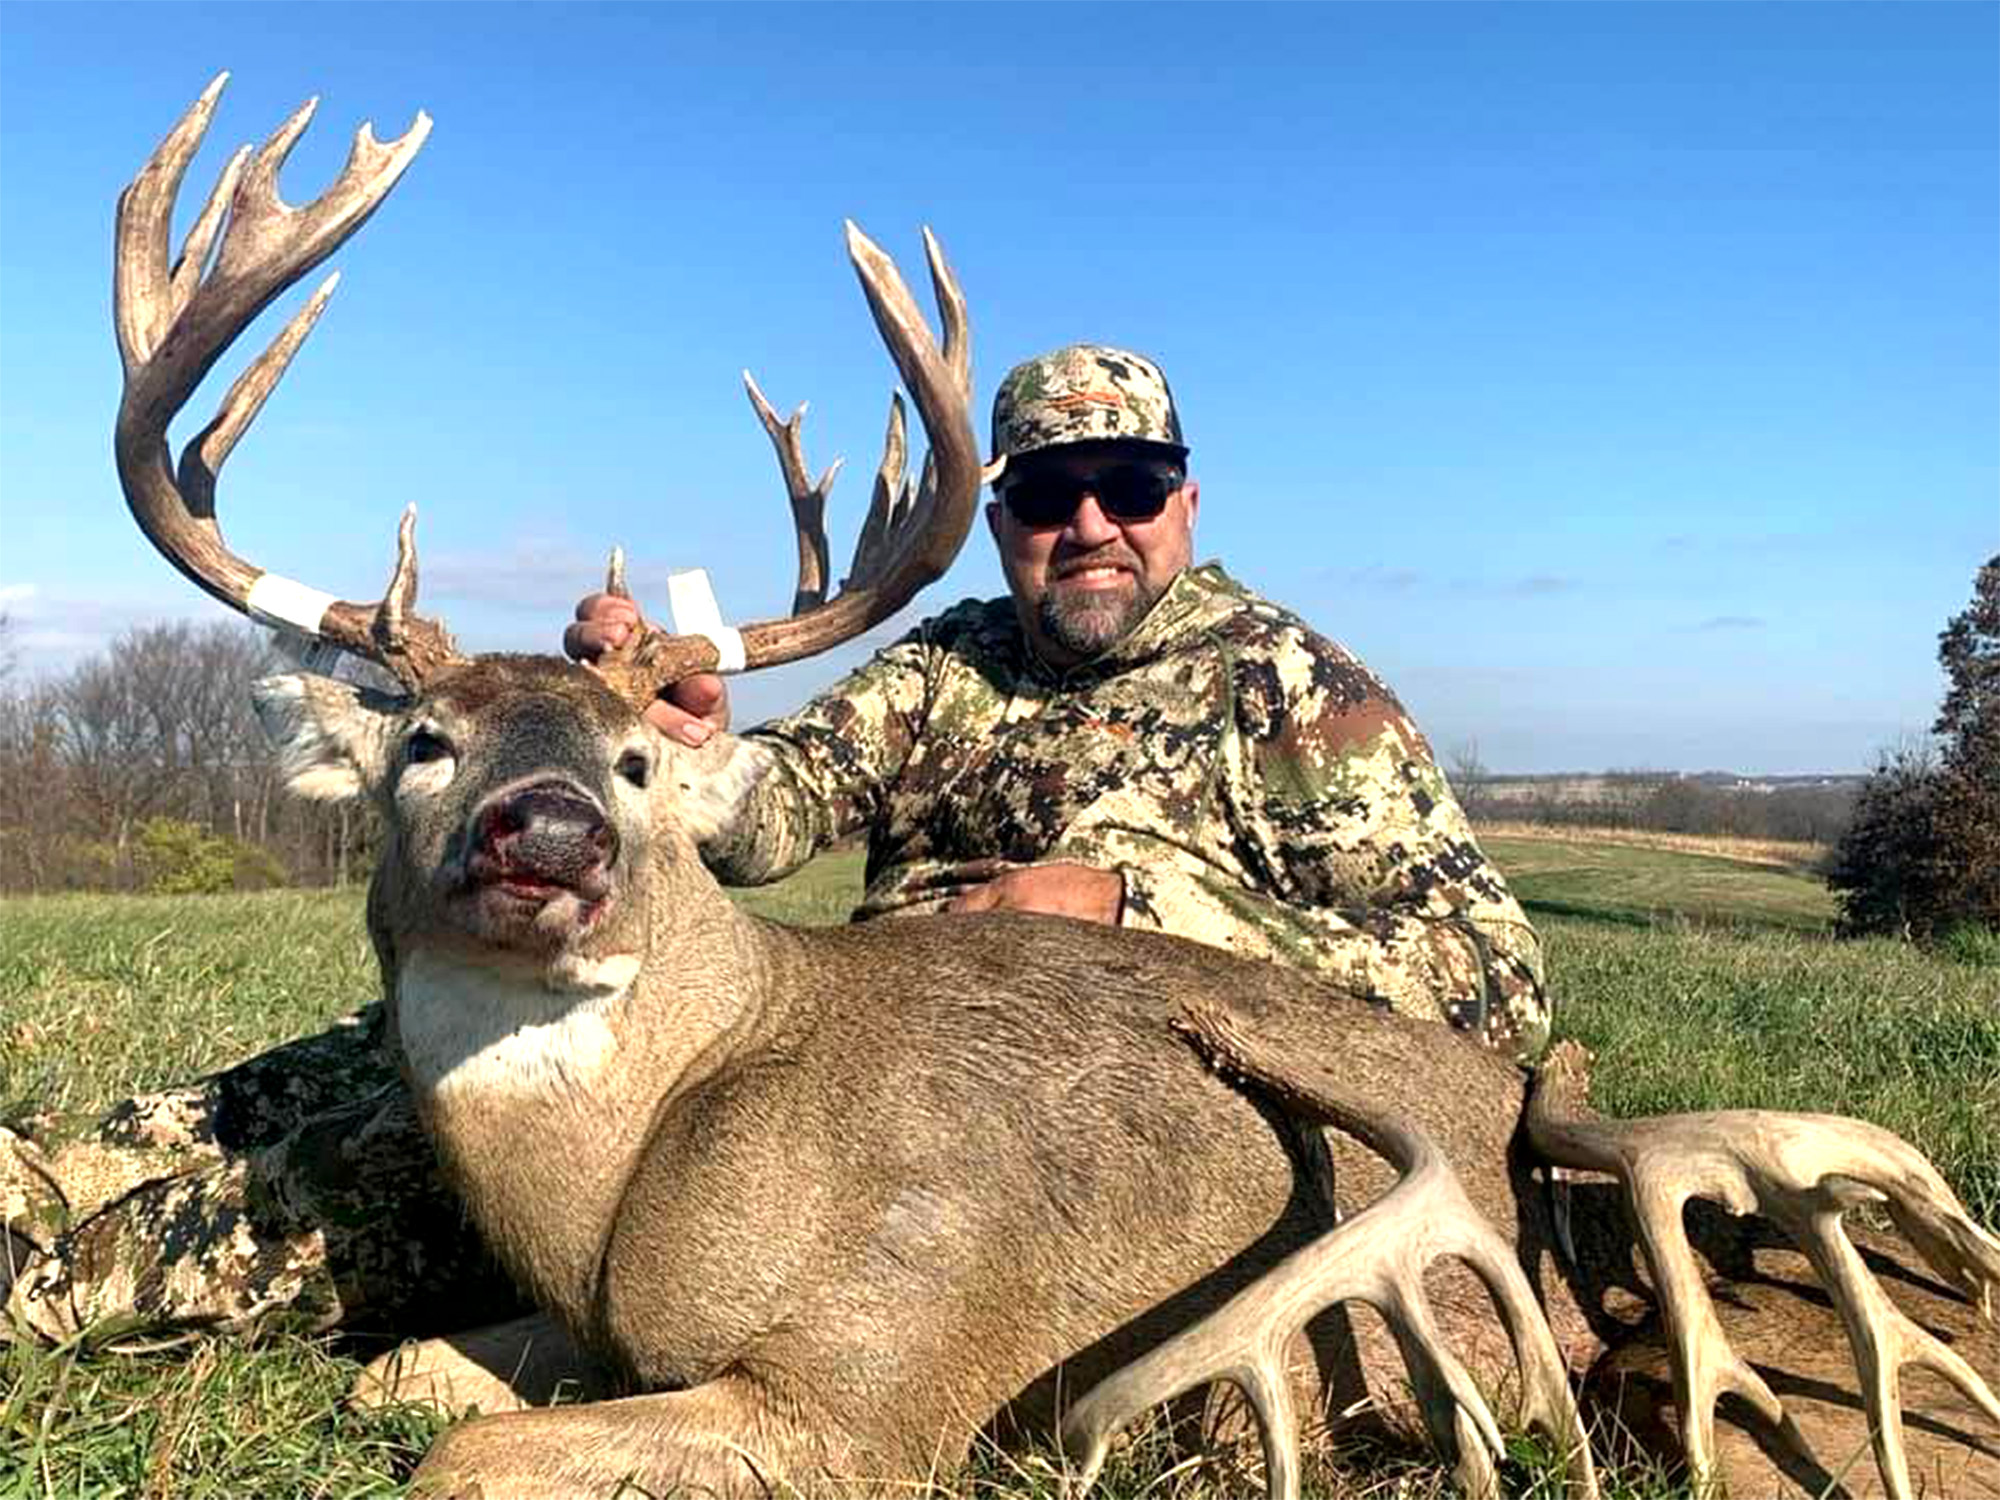 Iowa Bowhunter Sends Up a Prayer and Knocks Down a 207-Inch Whitetail